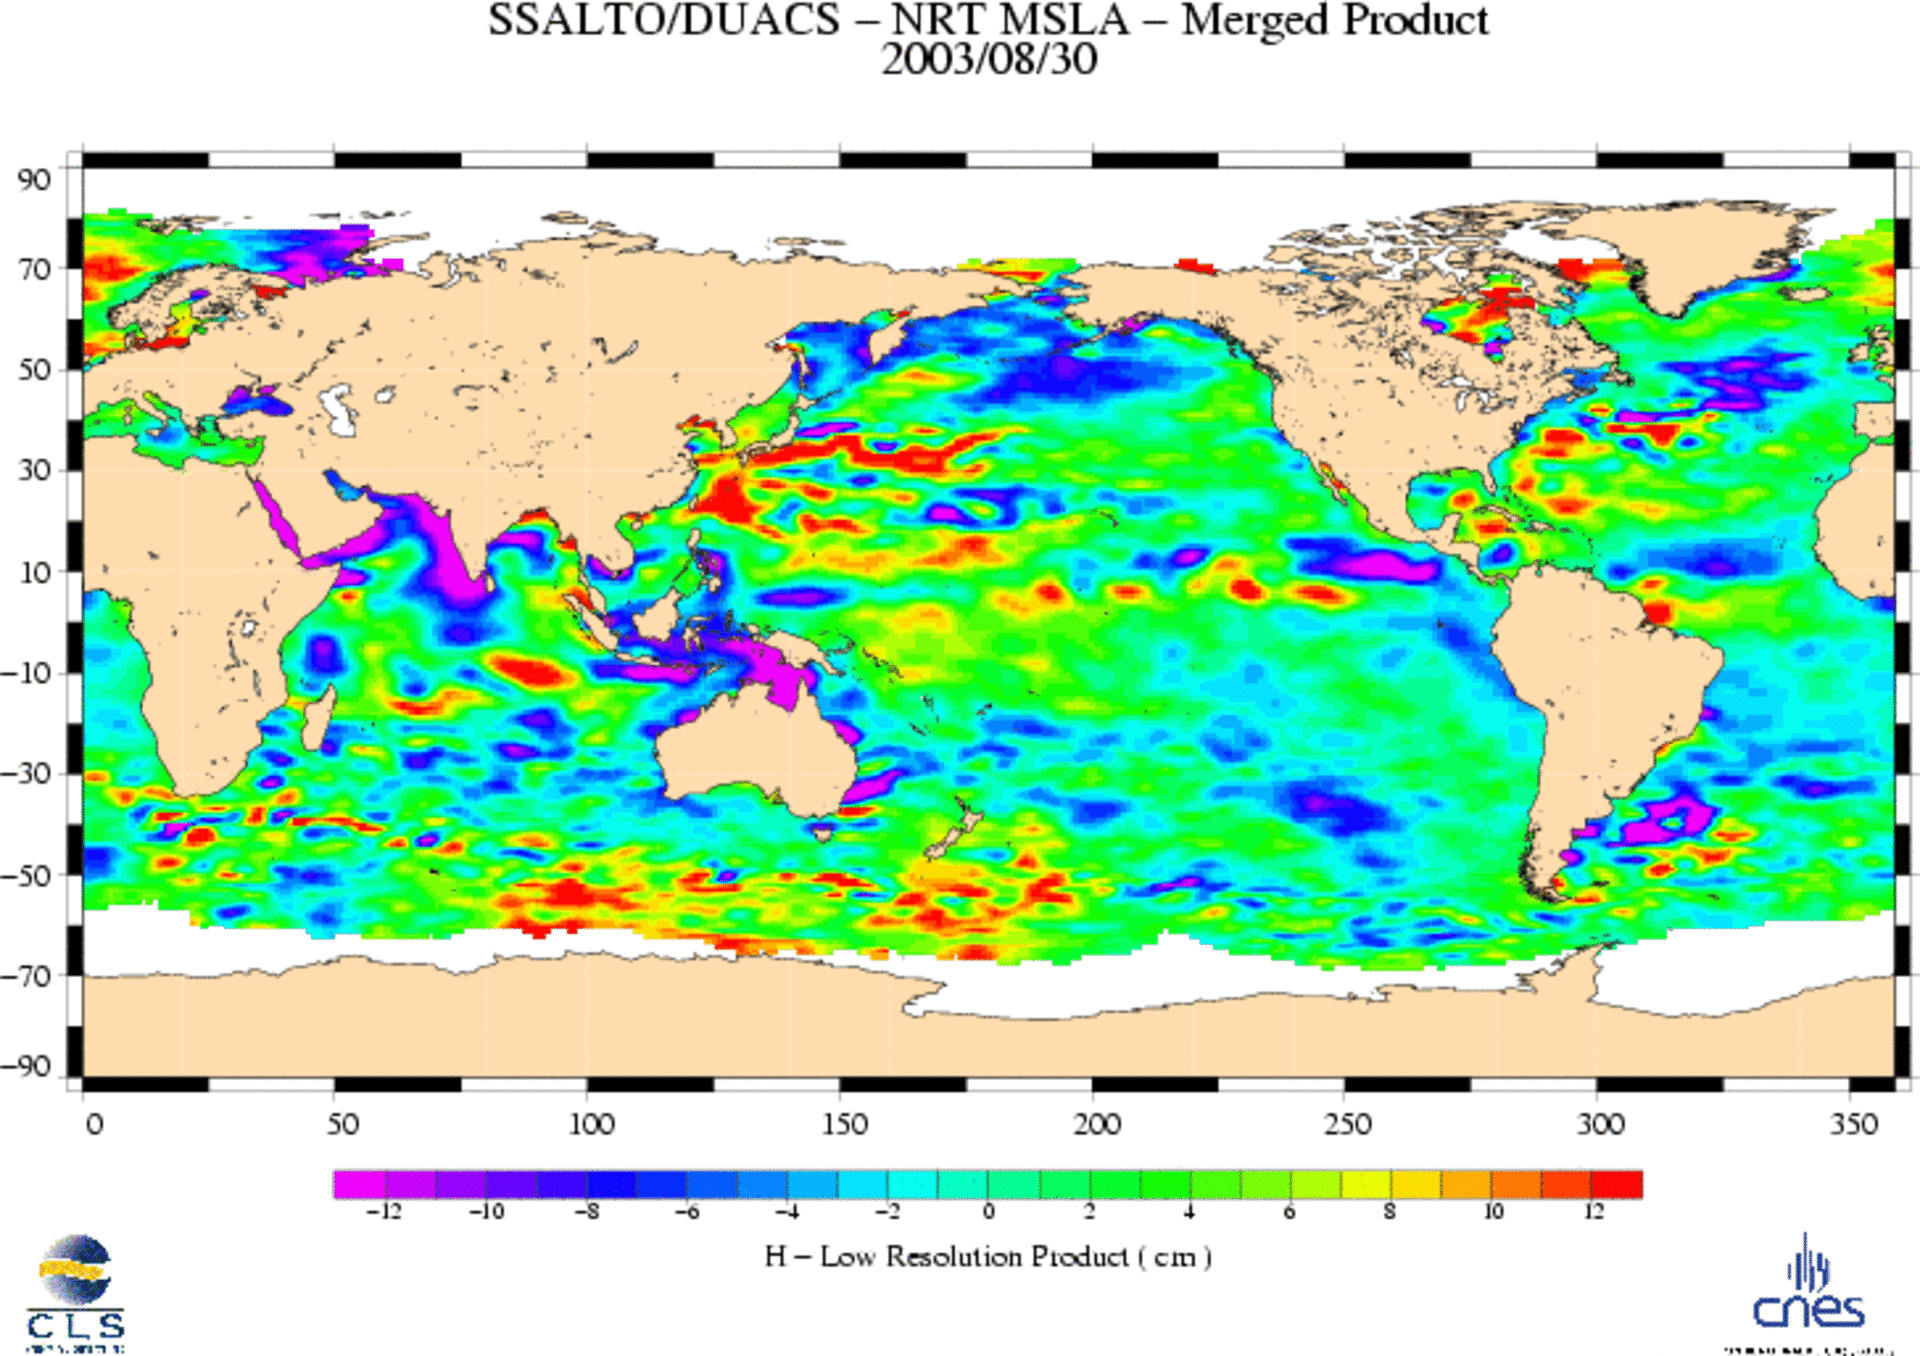 RA-2 sea surface measurements merged with other space-derived altimeter data